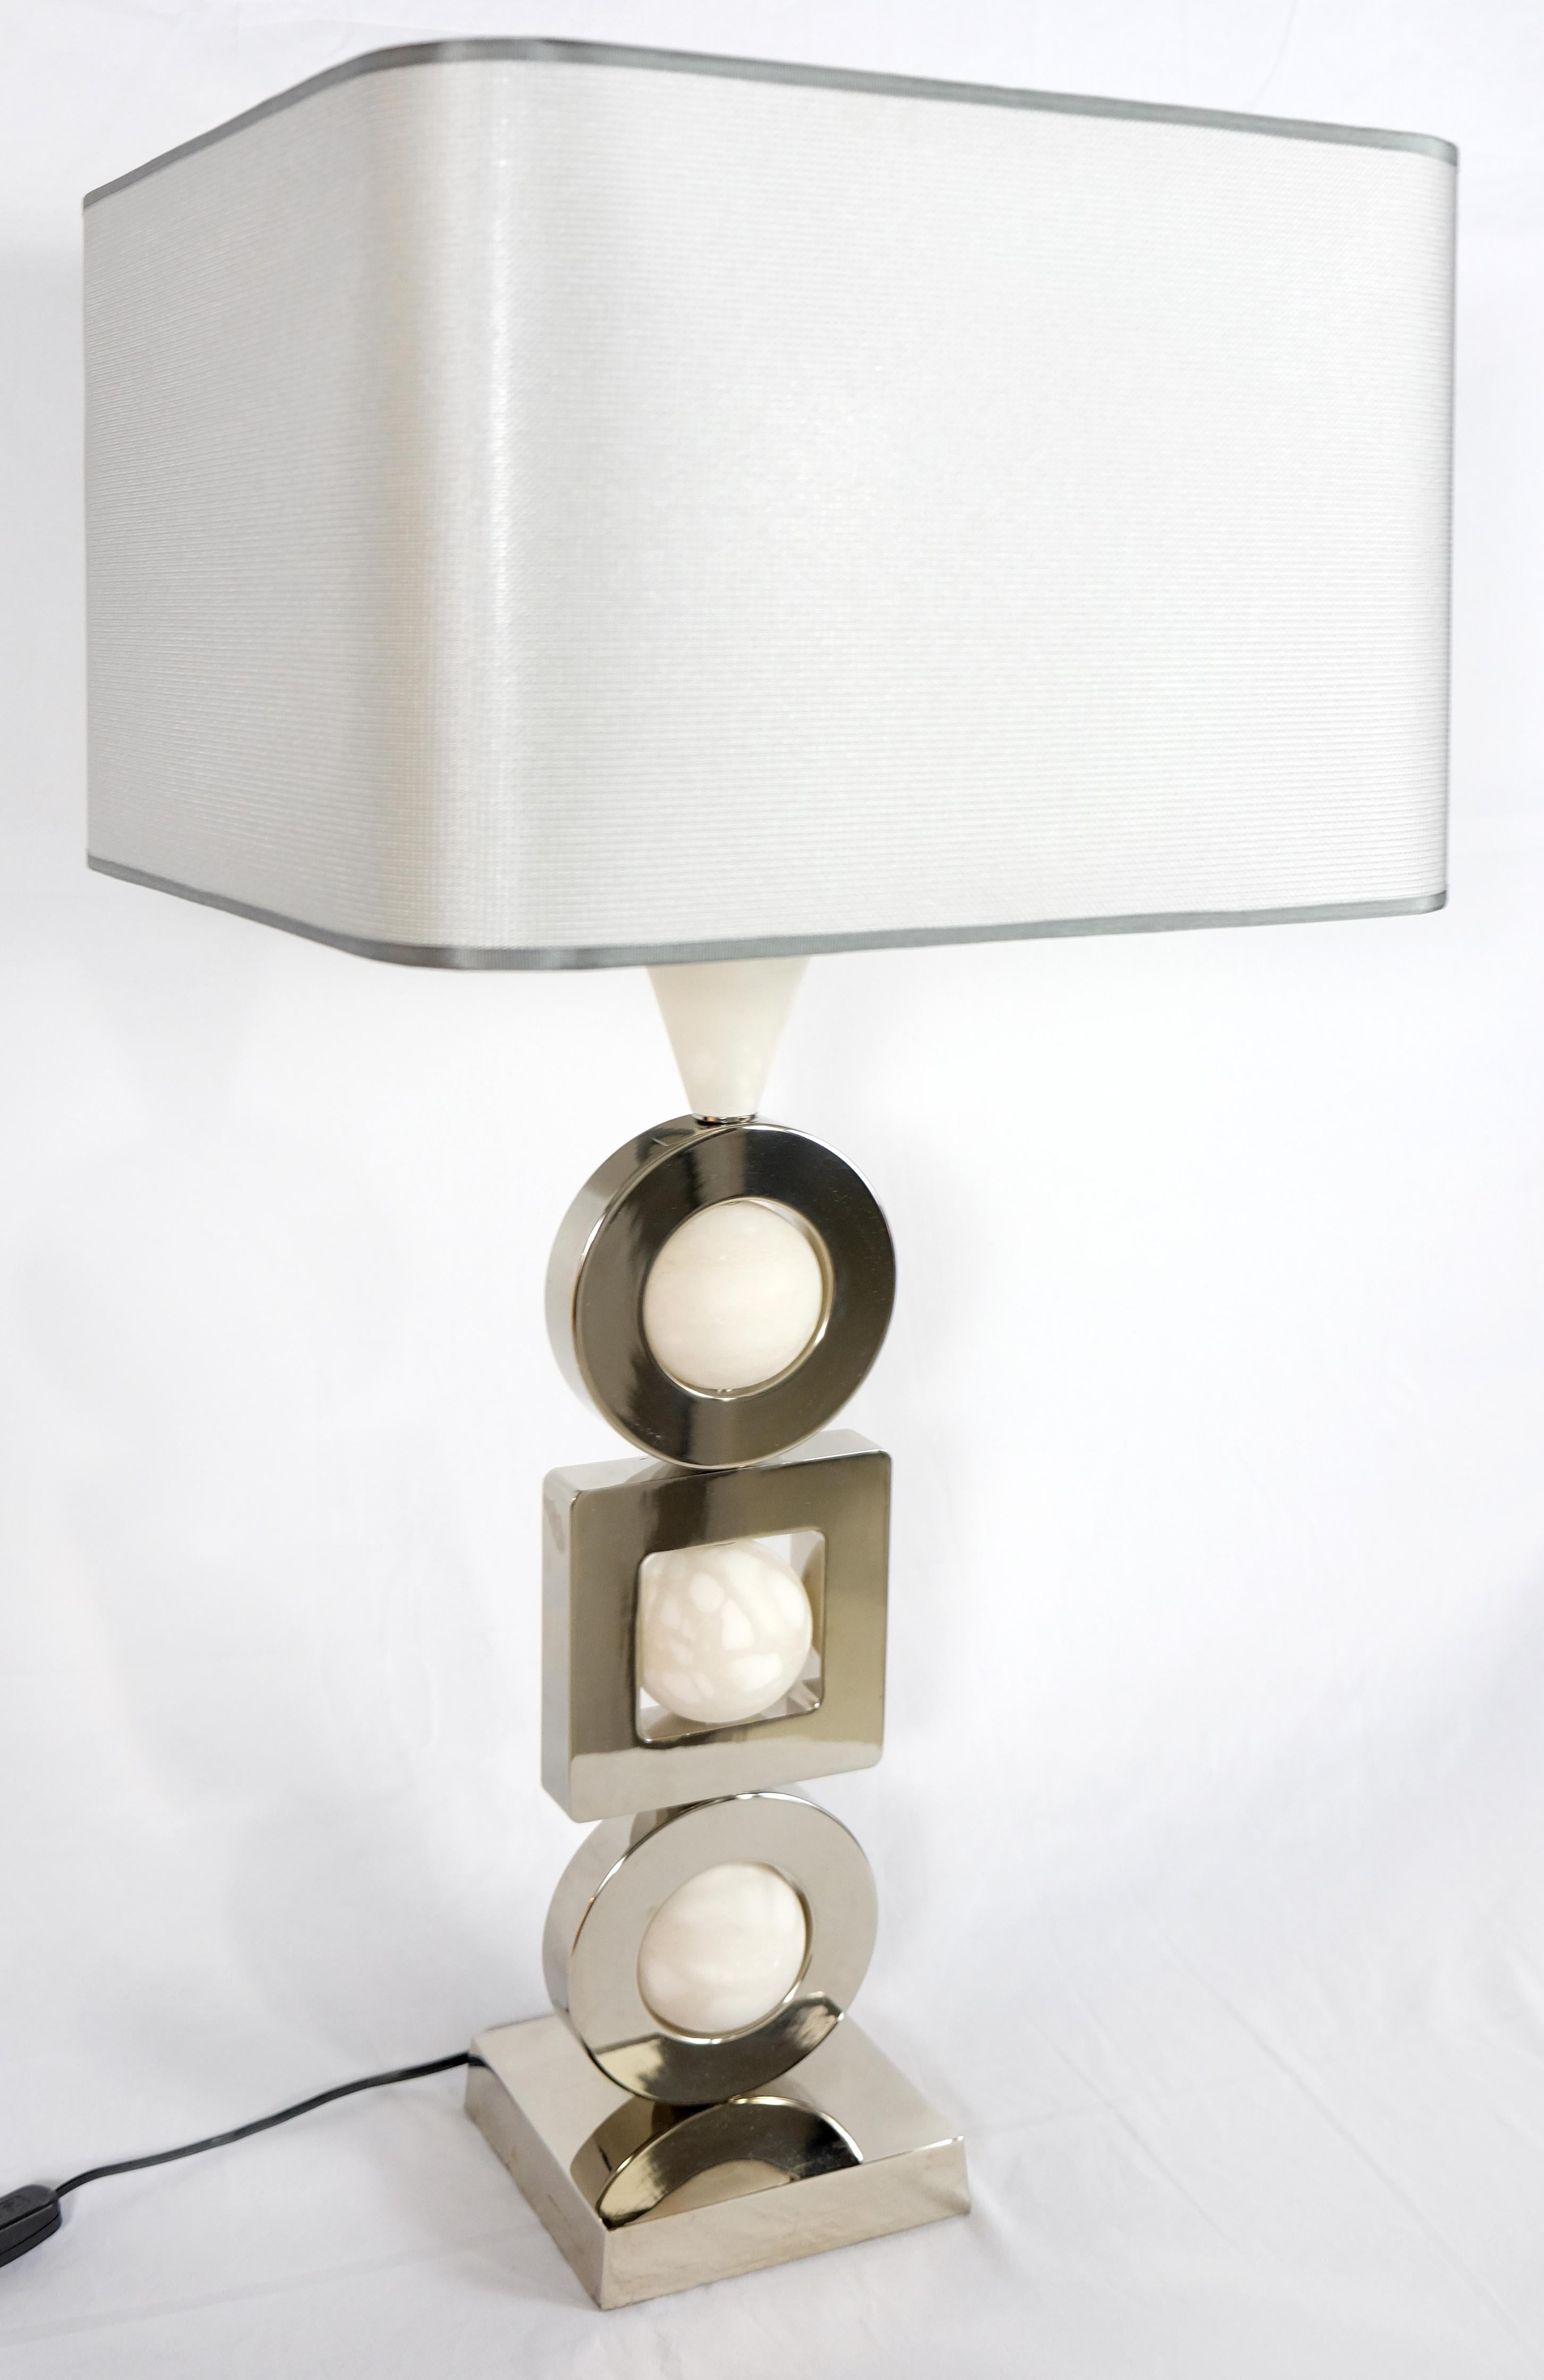 Laudarte Srl Andromeda Table Lamp by Attilio Amato, pair available

Offered for sale is a fine quality brass and marble 